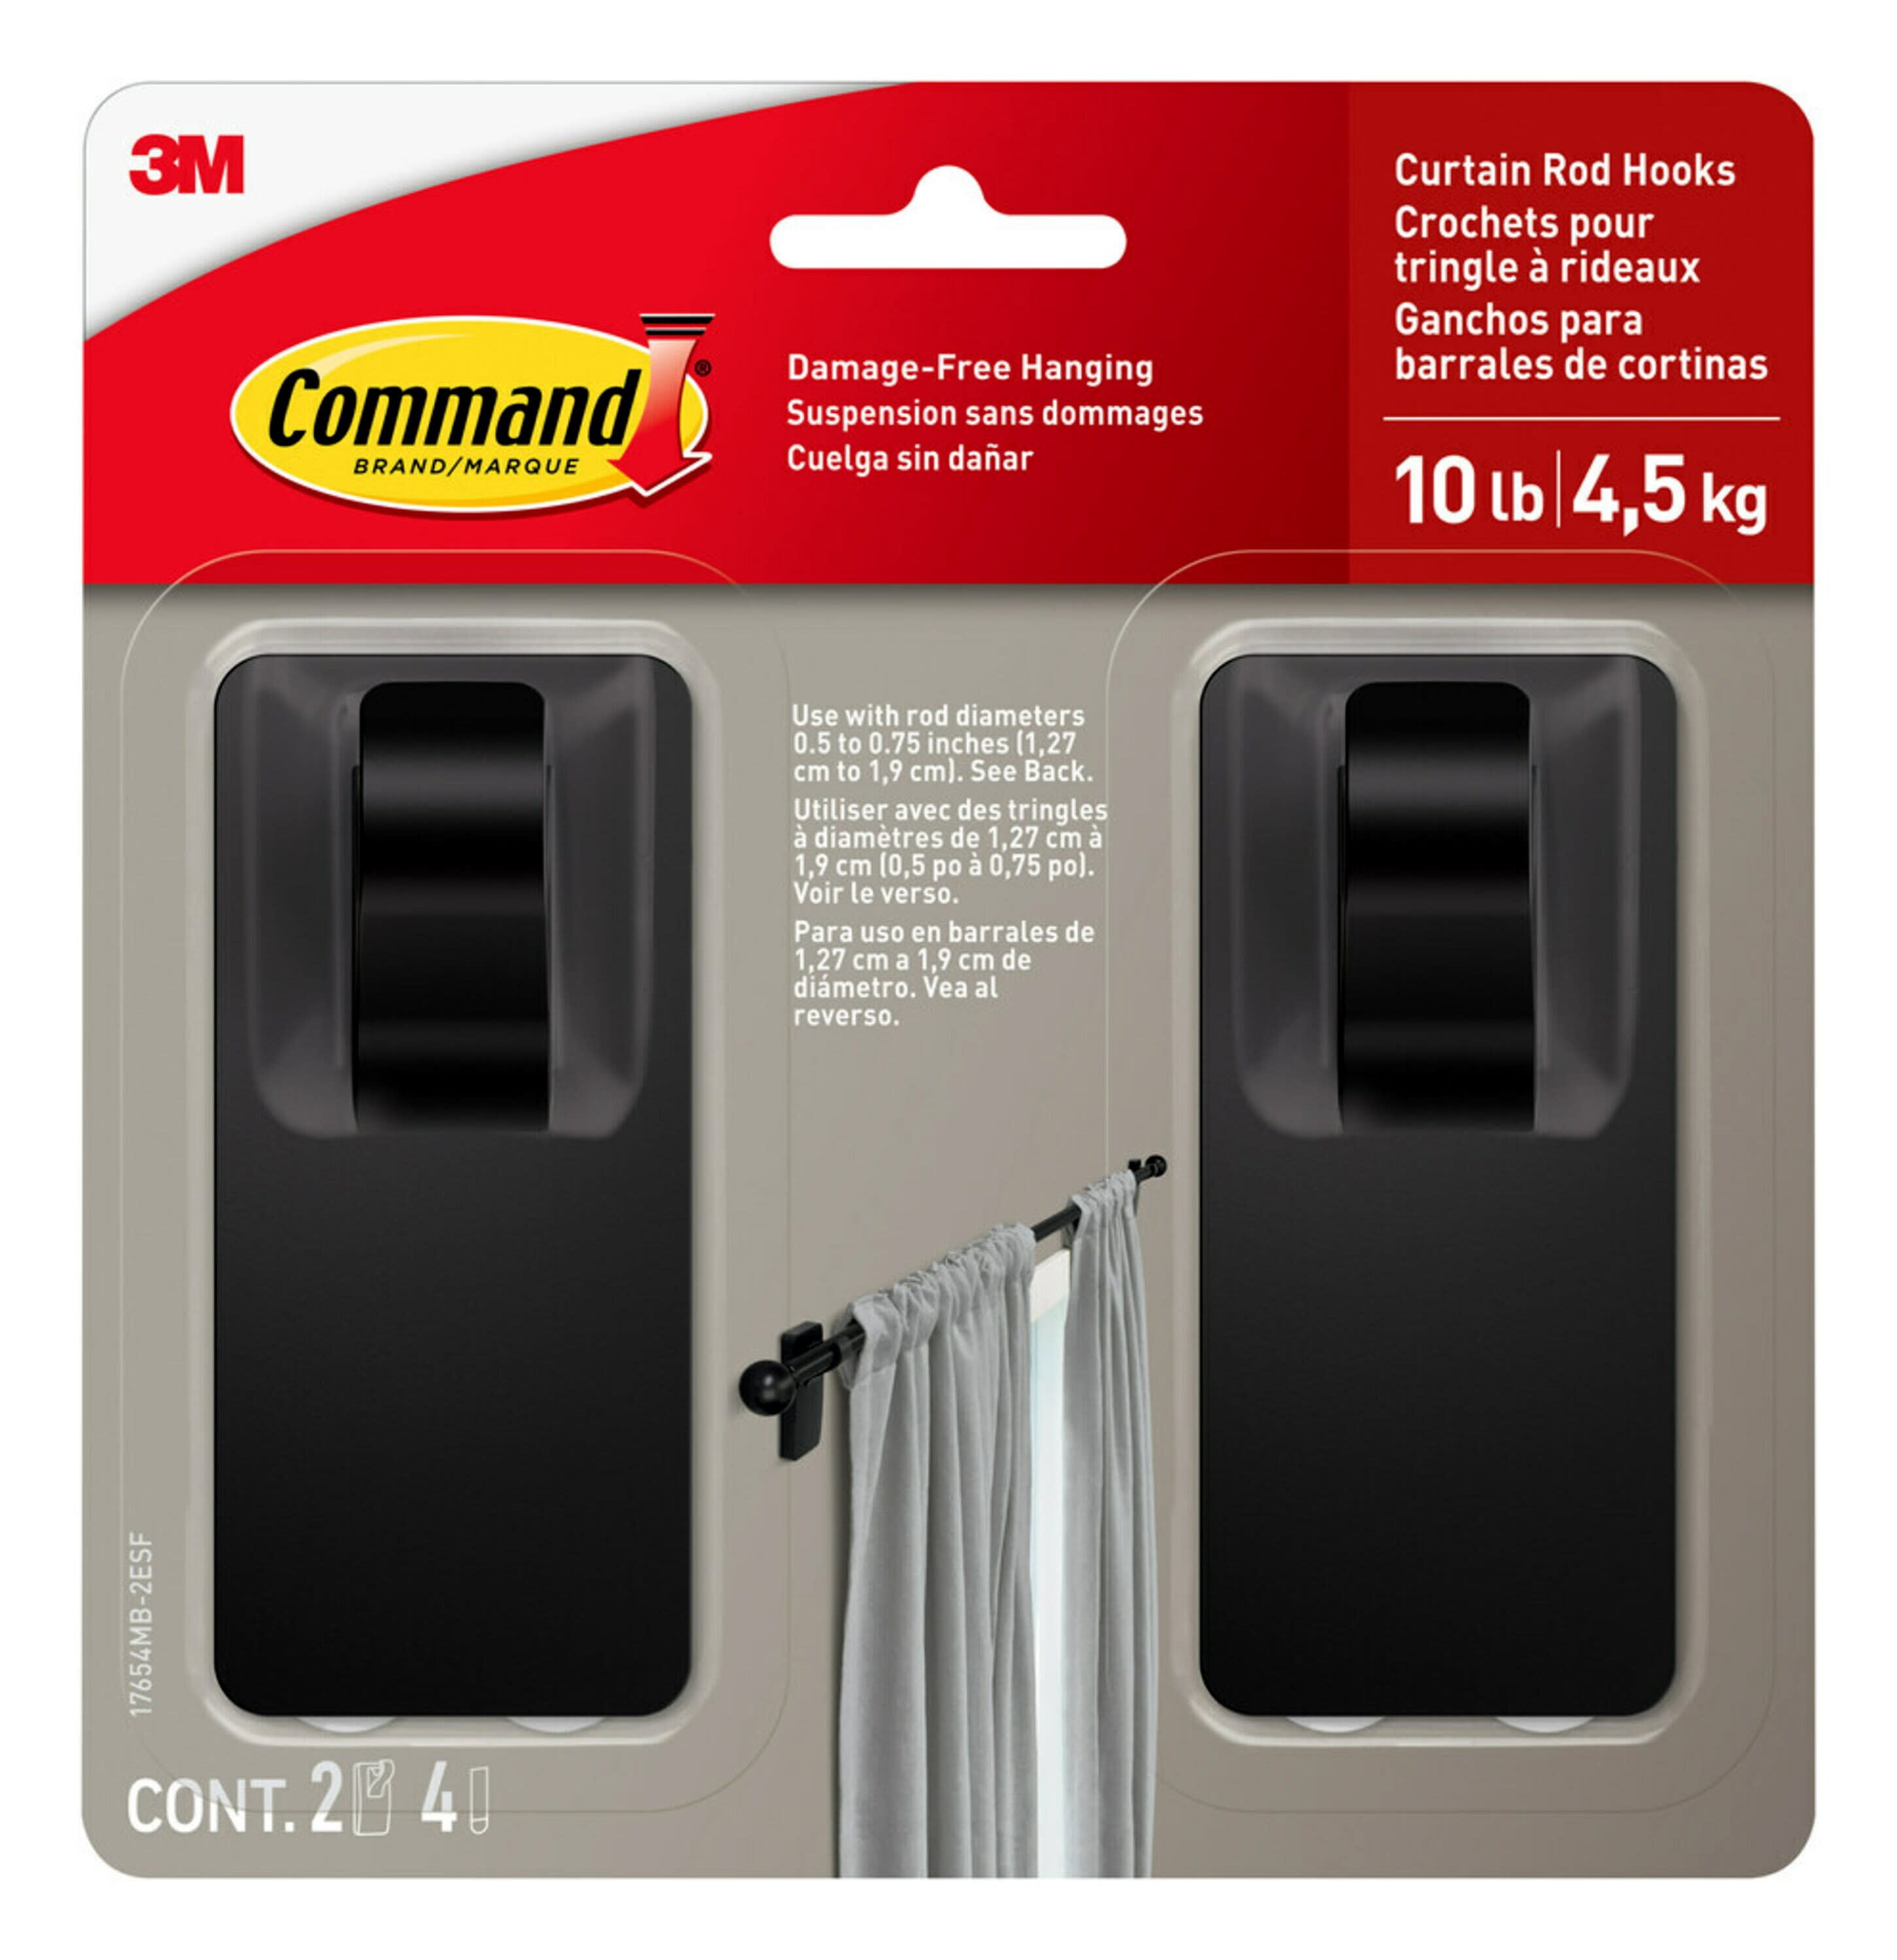 3M™ Command™ Wall Hook,Classic Large w/ Strips